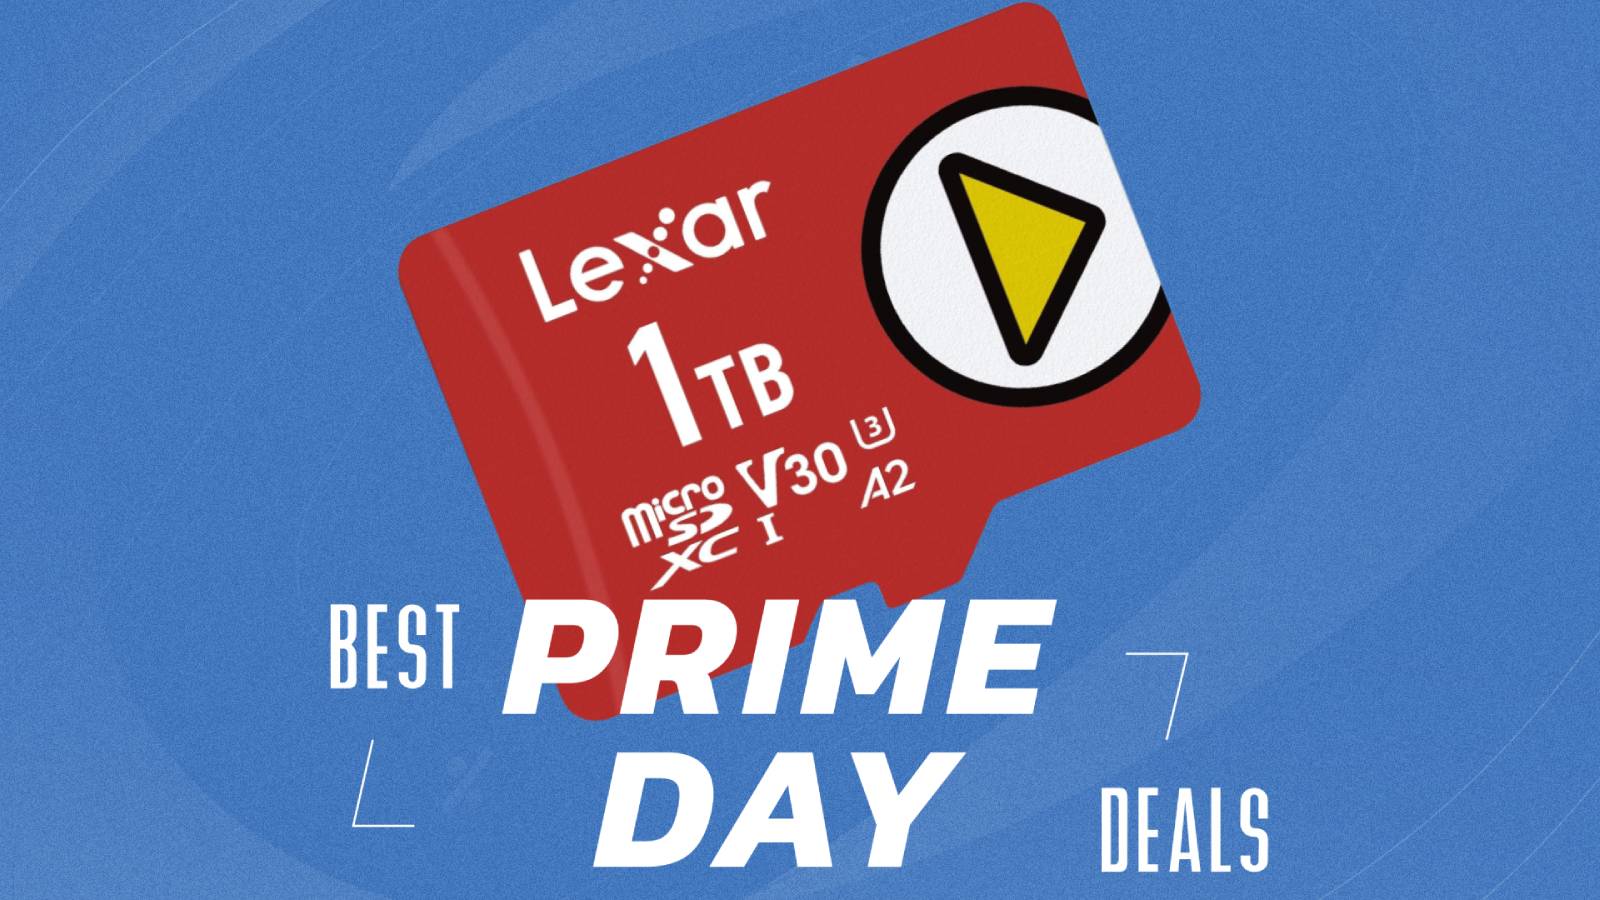 Prime Day lettering on a blue background featuring a MicroSD card